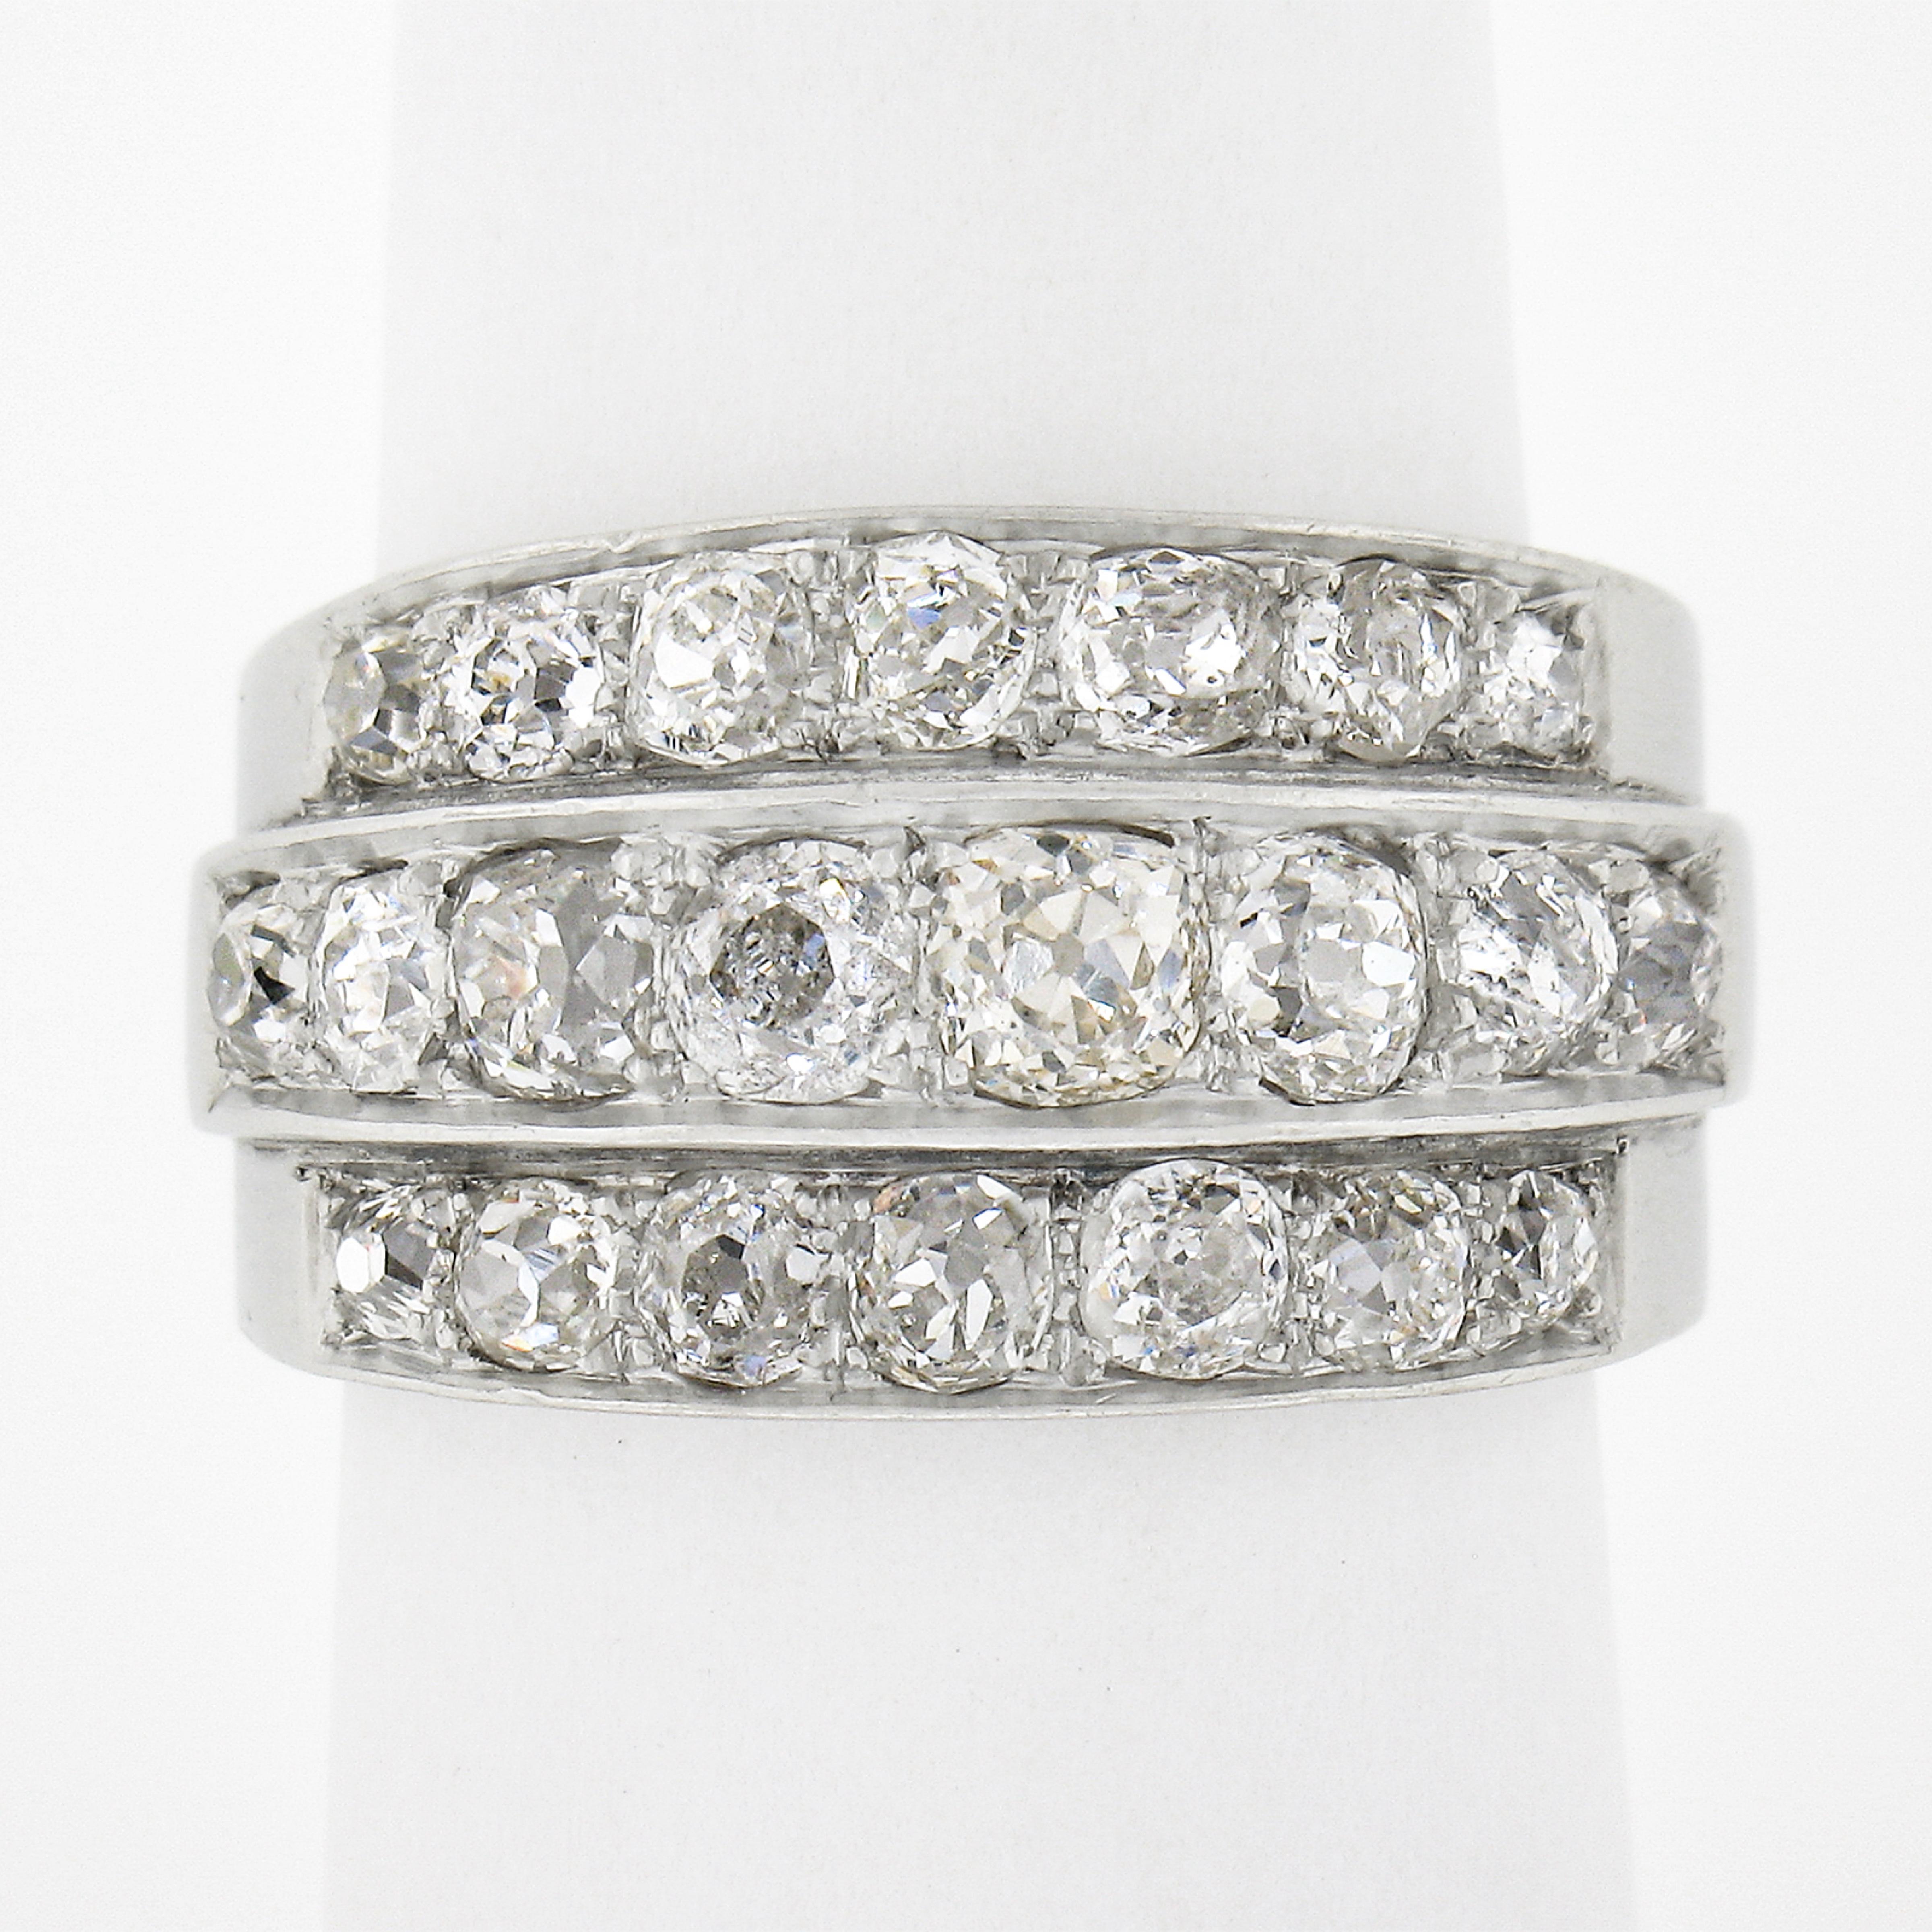 This desirable wide antique Edwardian band/ring features 3 rows of heart warming chunky old mine cut diamonds. Each diamond takes on its own life as they each sparkle uniquely with their own special facet pattern. The ring is all original and